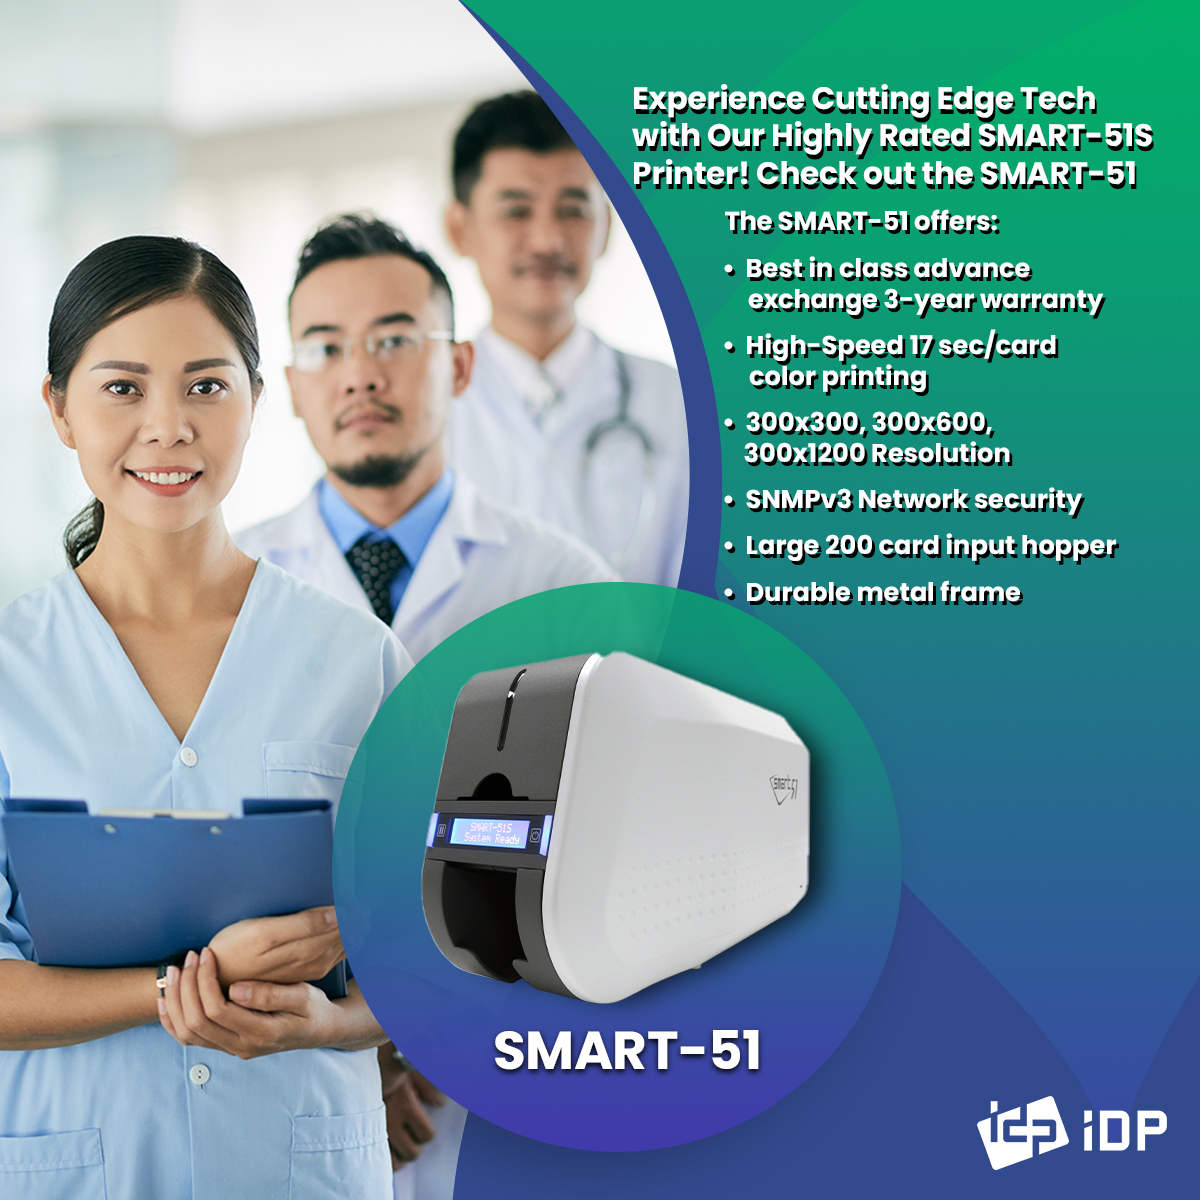 Experience Cutting Edge Tech with Our Highly Rated SMART-51 Series Printer!
#identitymanagement #badgeprinter #accesscontrol